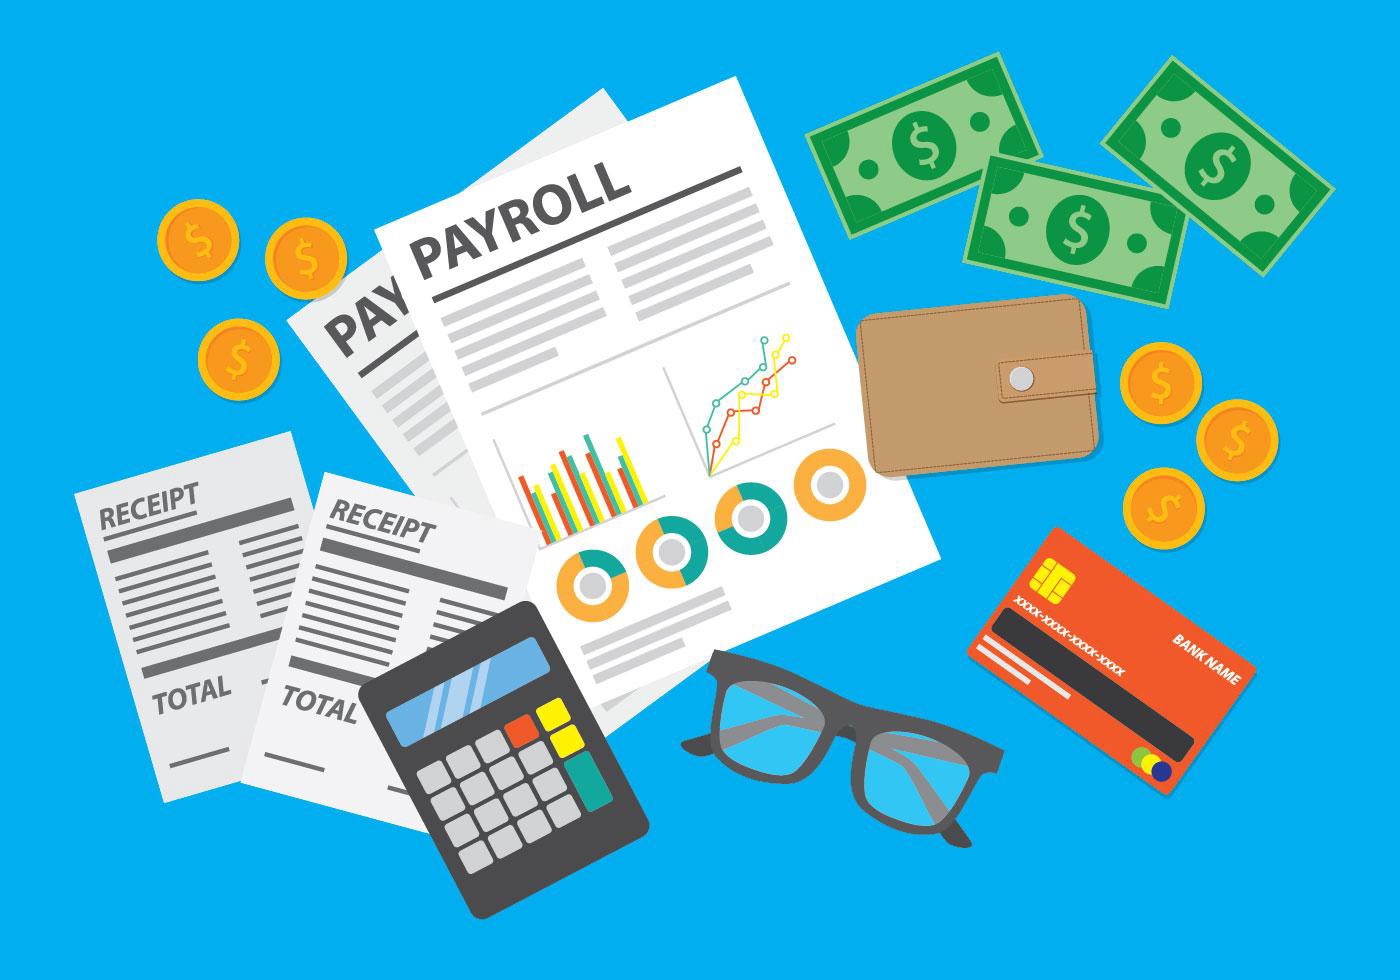 Reasons why businesses should use outsourcing payroll management services